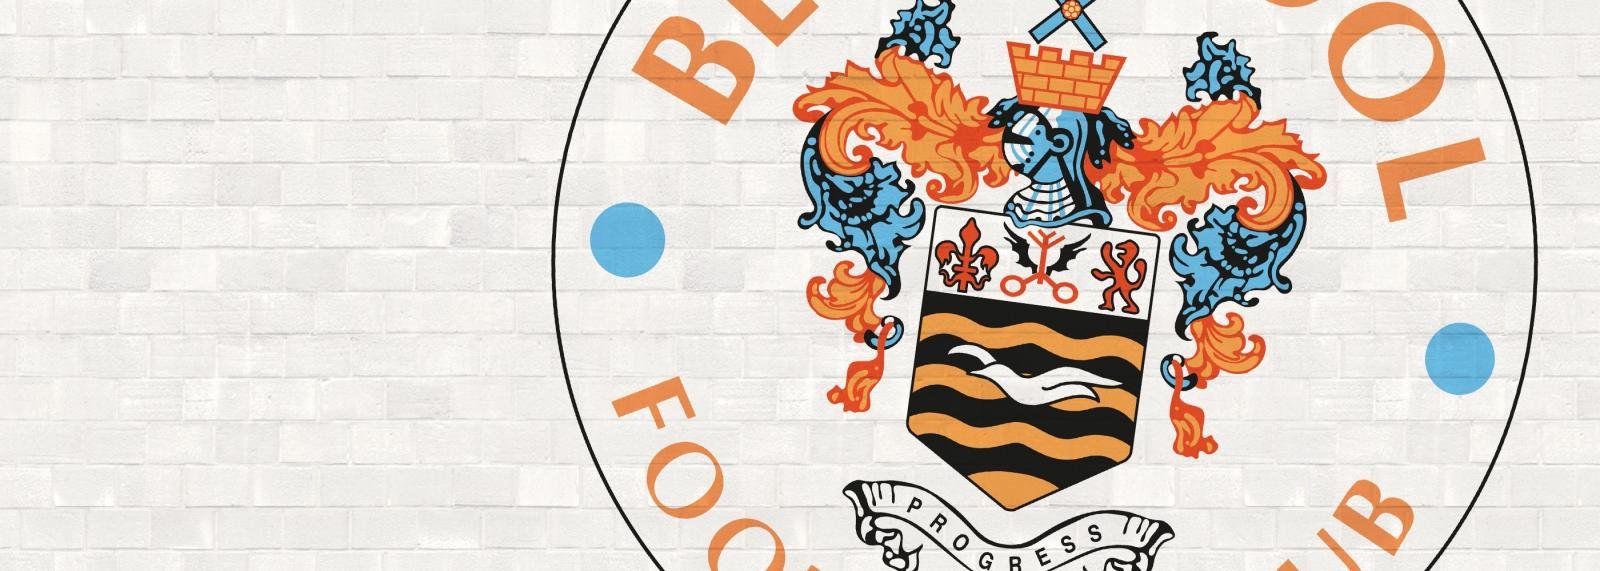 What Gary Bowyer’s appointment means for Blackpool